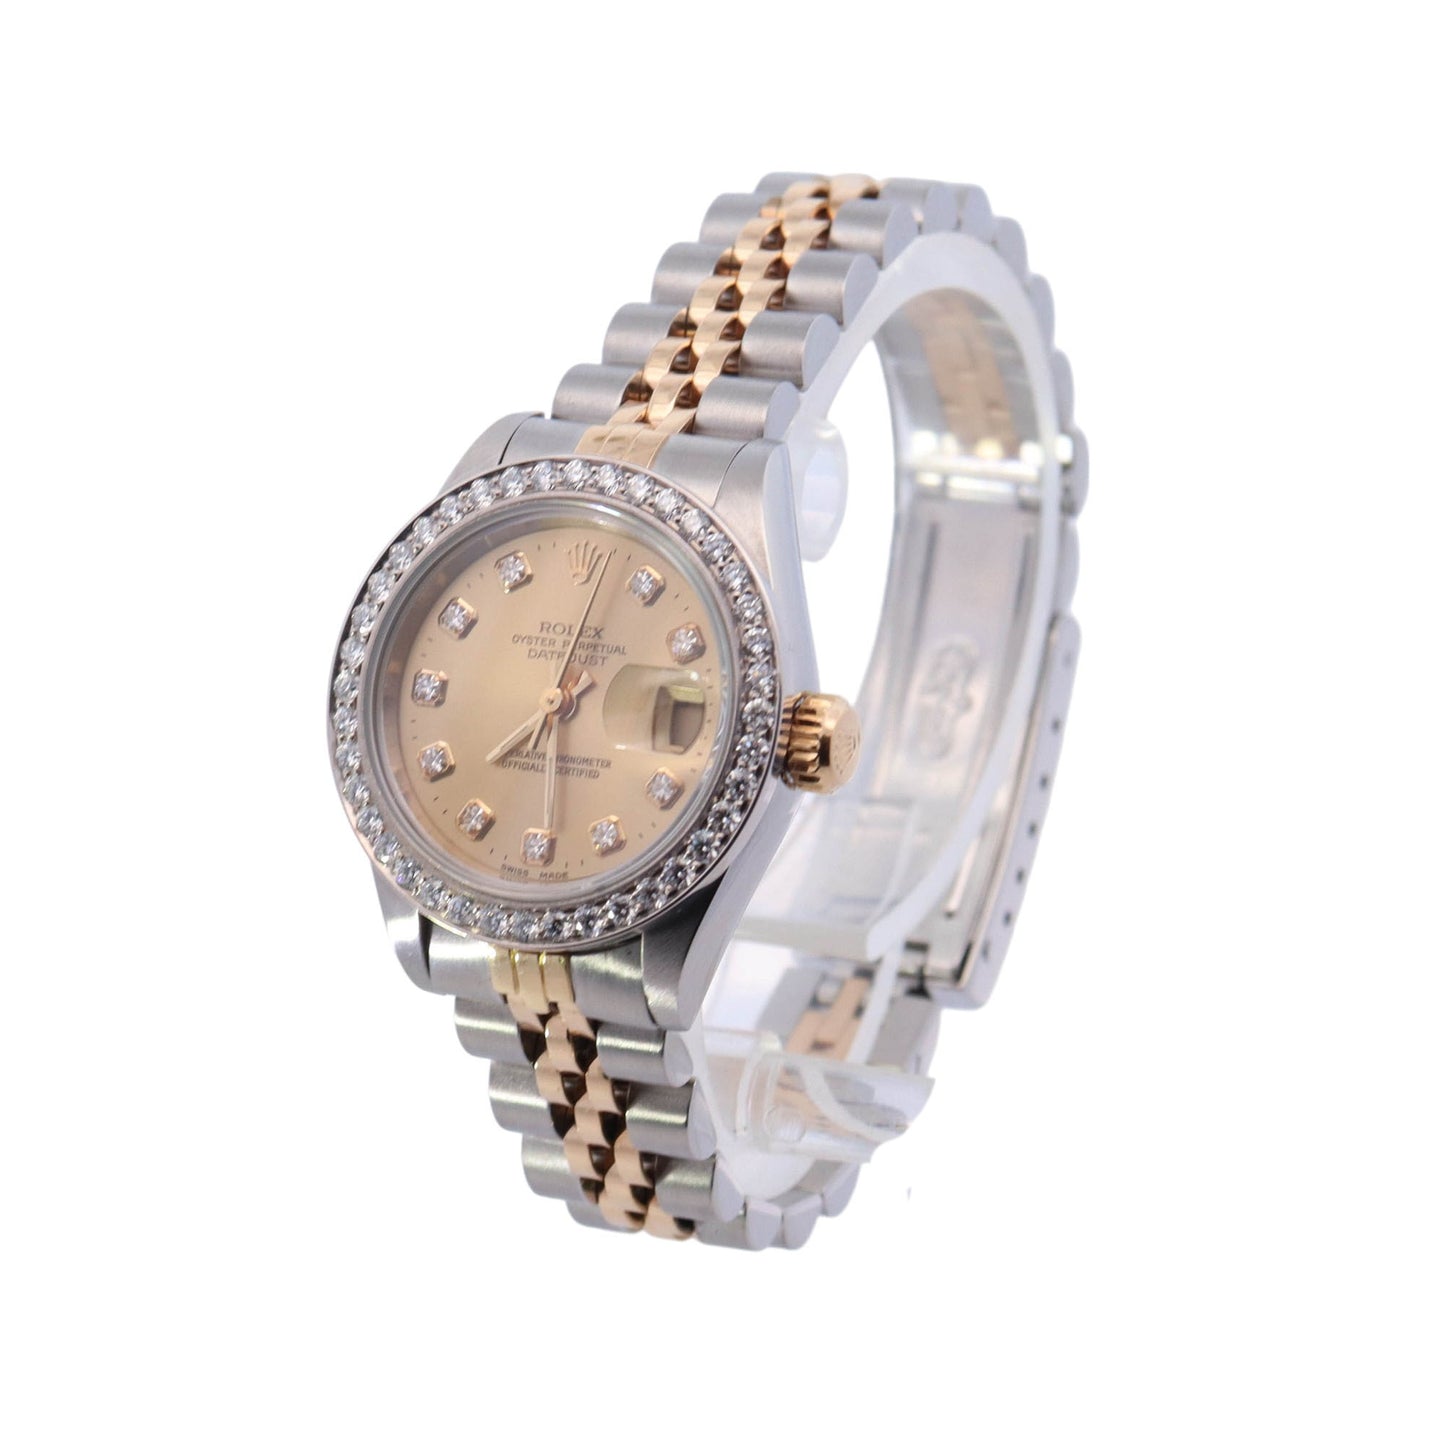 Rolex Datejust Two Tone Yellow Gold & Steel 26mm Custom Champagne Diamond Dial Watch Reference #: 69173